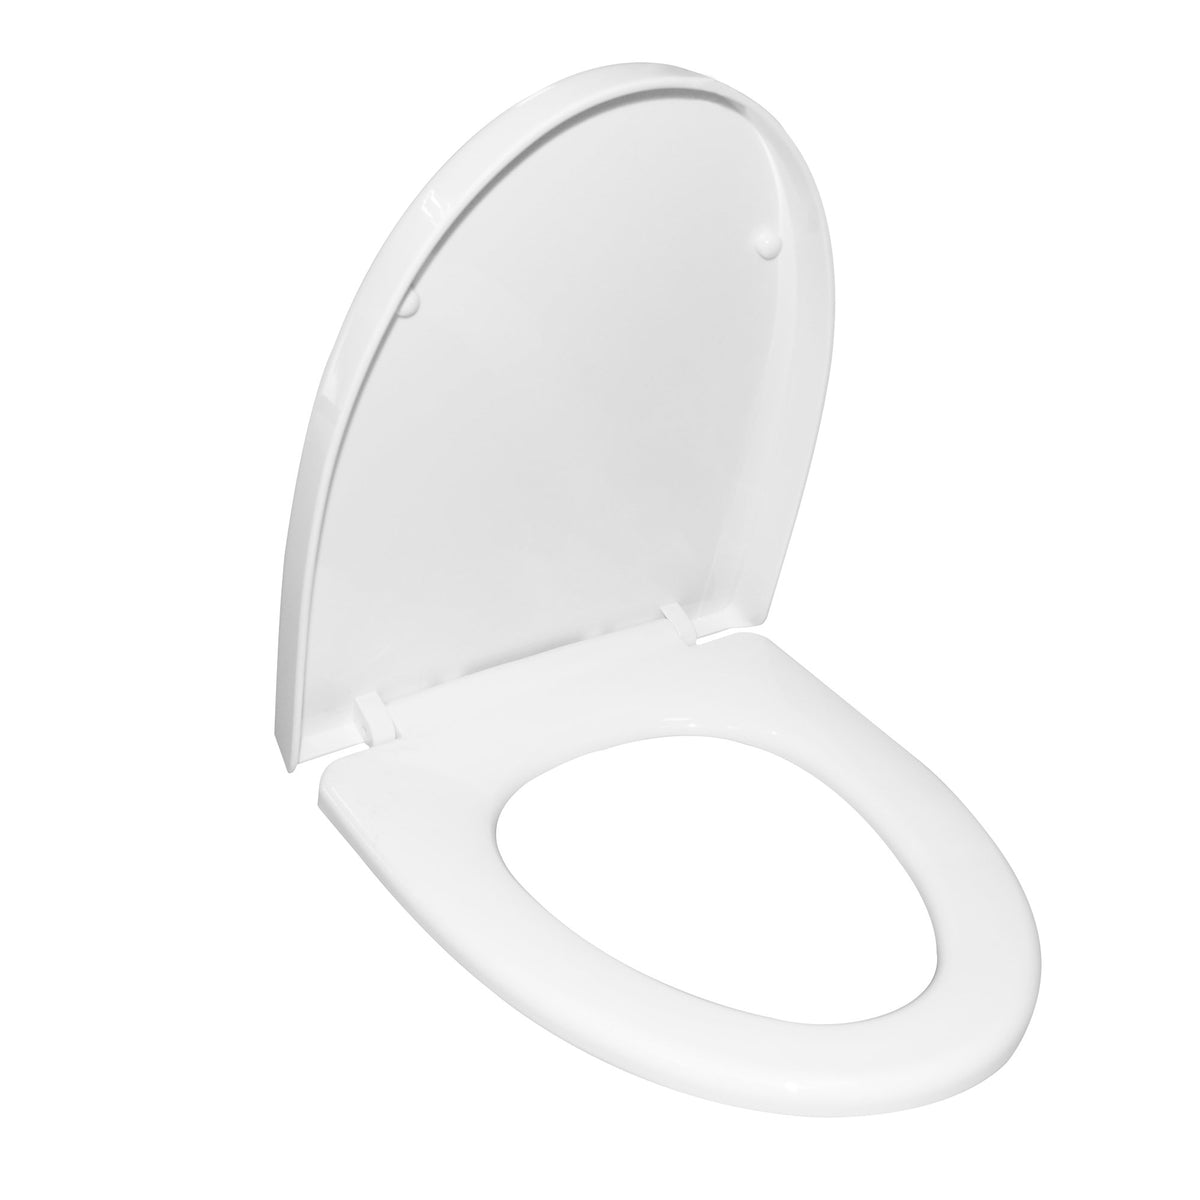 Teams Soft Slow Close WC Toilet Seat Replaces Pura Ice Arco Seat RR83 